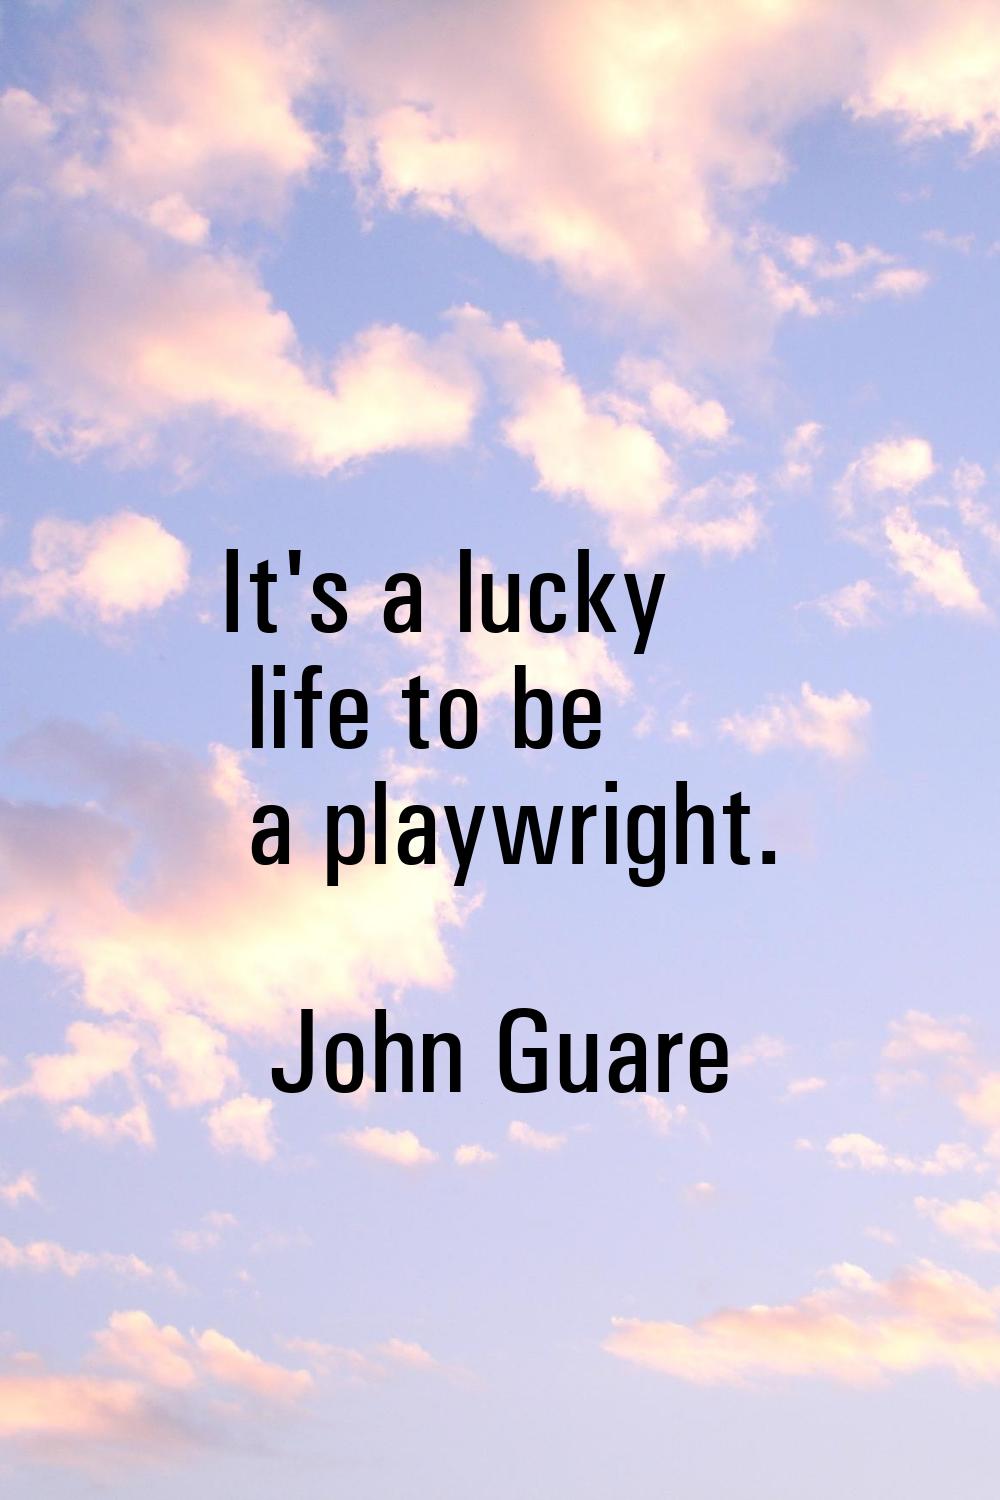 It's a lucky life to be a playwright.